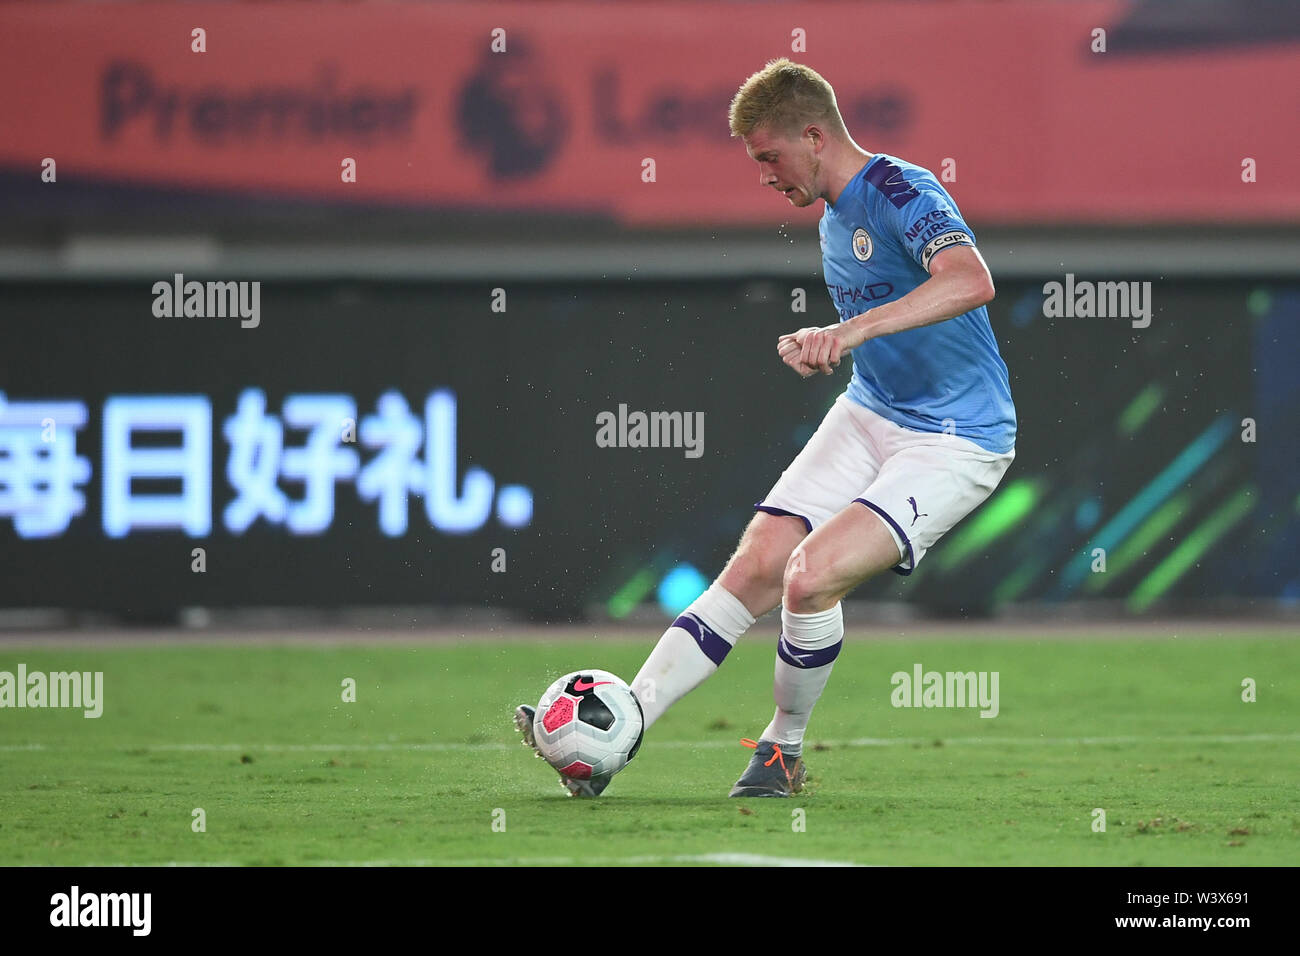 German football player Kevin De Bruyne of Manchester City F.C. of English League champions dribbles against West Ham United F.C. in the semifinal match of the Premier League Asia Trophy 2019 in Nanjing city, east China's Jiangsu province, 17 July 2019. Manchester City F.C. defeated West Ham United F.C. 4-1. Stock Photo